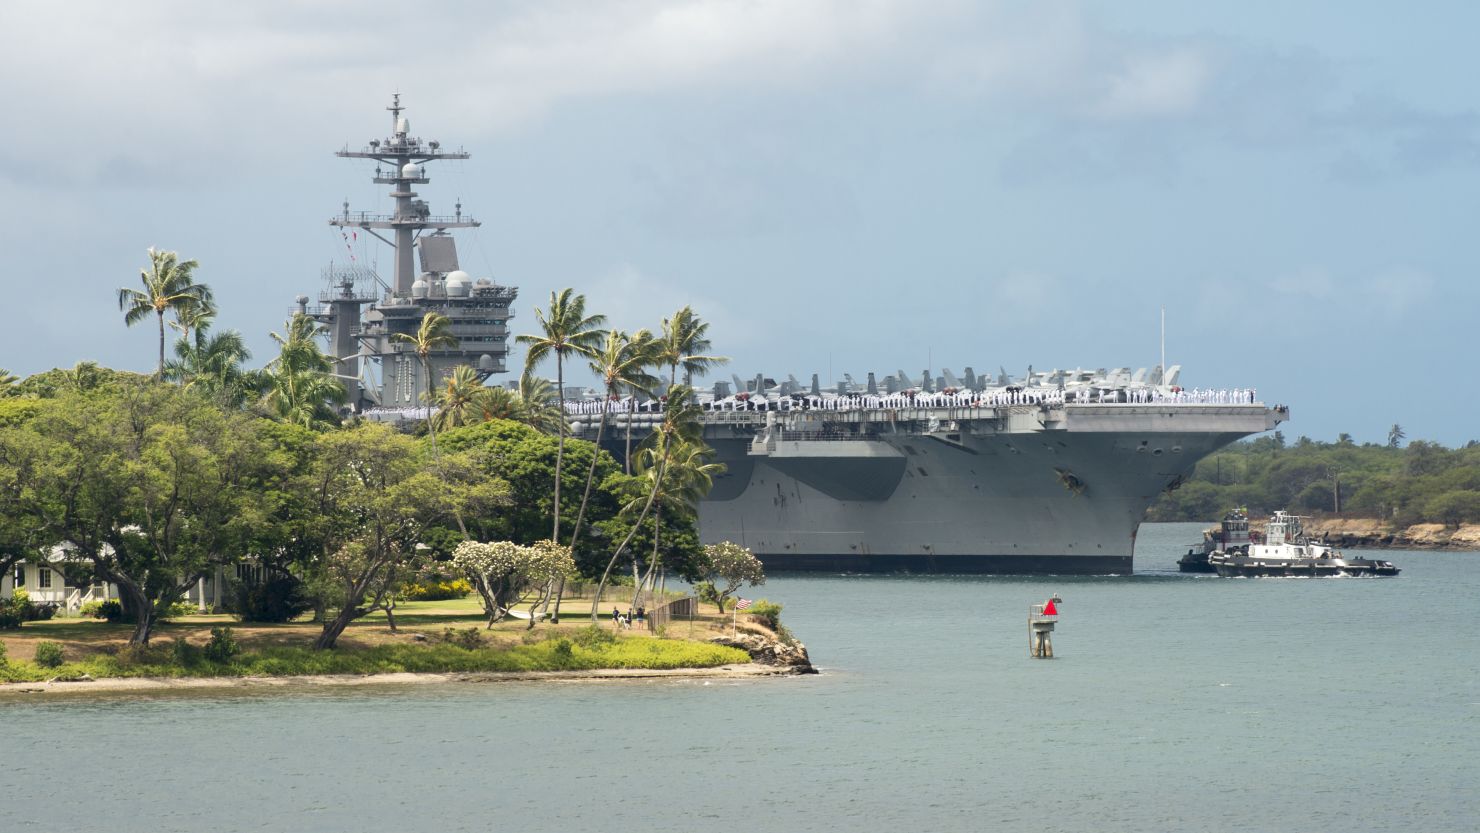 The aircraft carrier USS Carl Vinson (CVN 70) enters Pearl Harbor in preparation for Exercise Rim of the Pacific (RIMPAC) 2018. Twenty-five nations, more than 45 ships and submarines, about 200 aircraft, and 25,000 personnel are participating in RIMPAC from June 27 to Aug. 2 in and around the Hawaiian Islands and Southern California. 